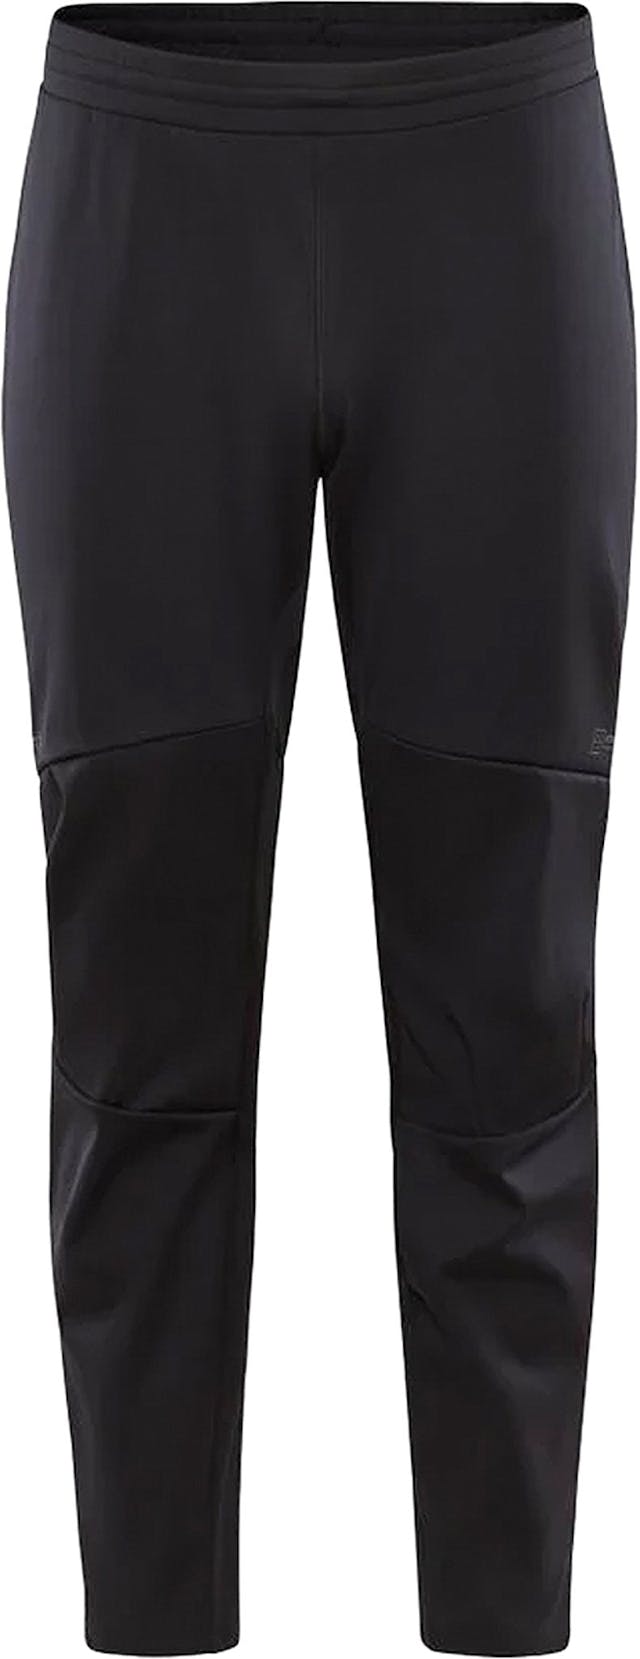 Product image for Core Nordic Training Pants - Men's